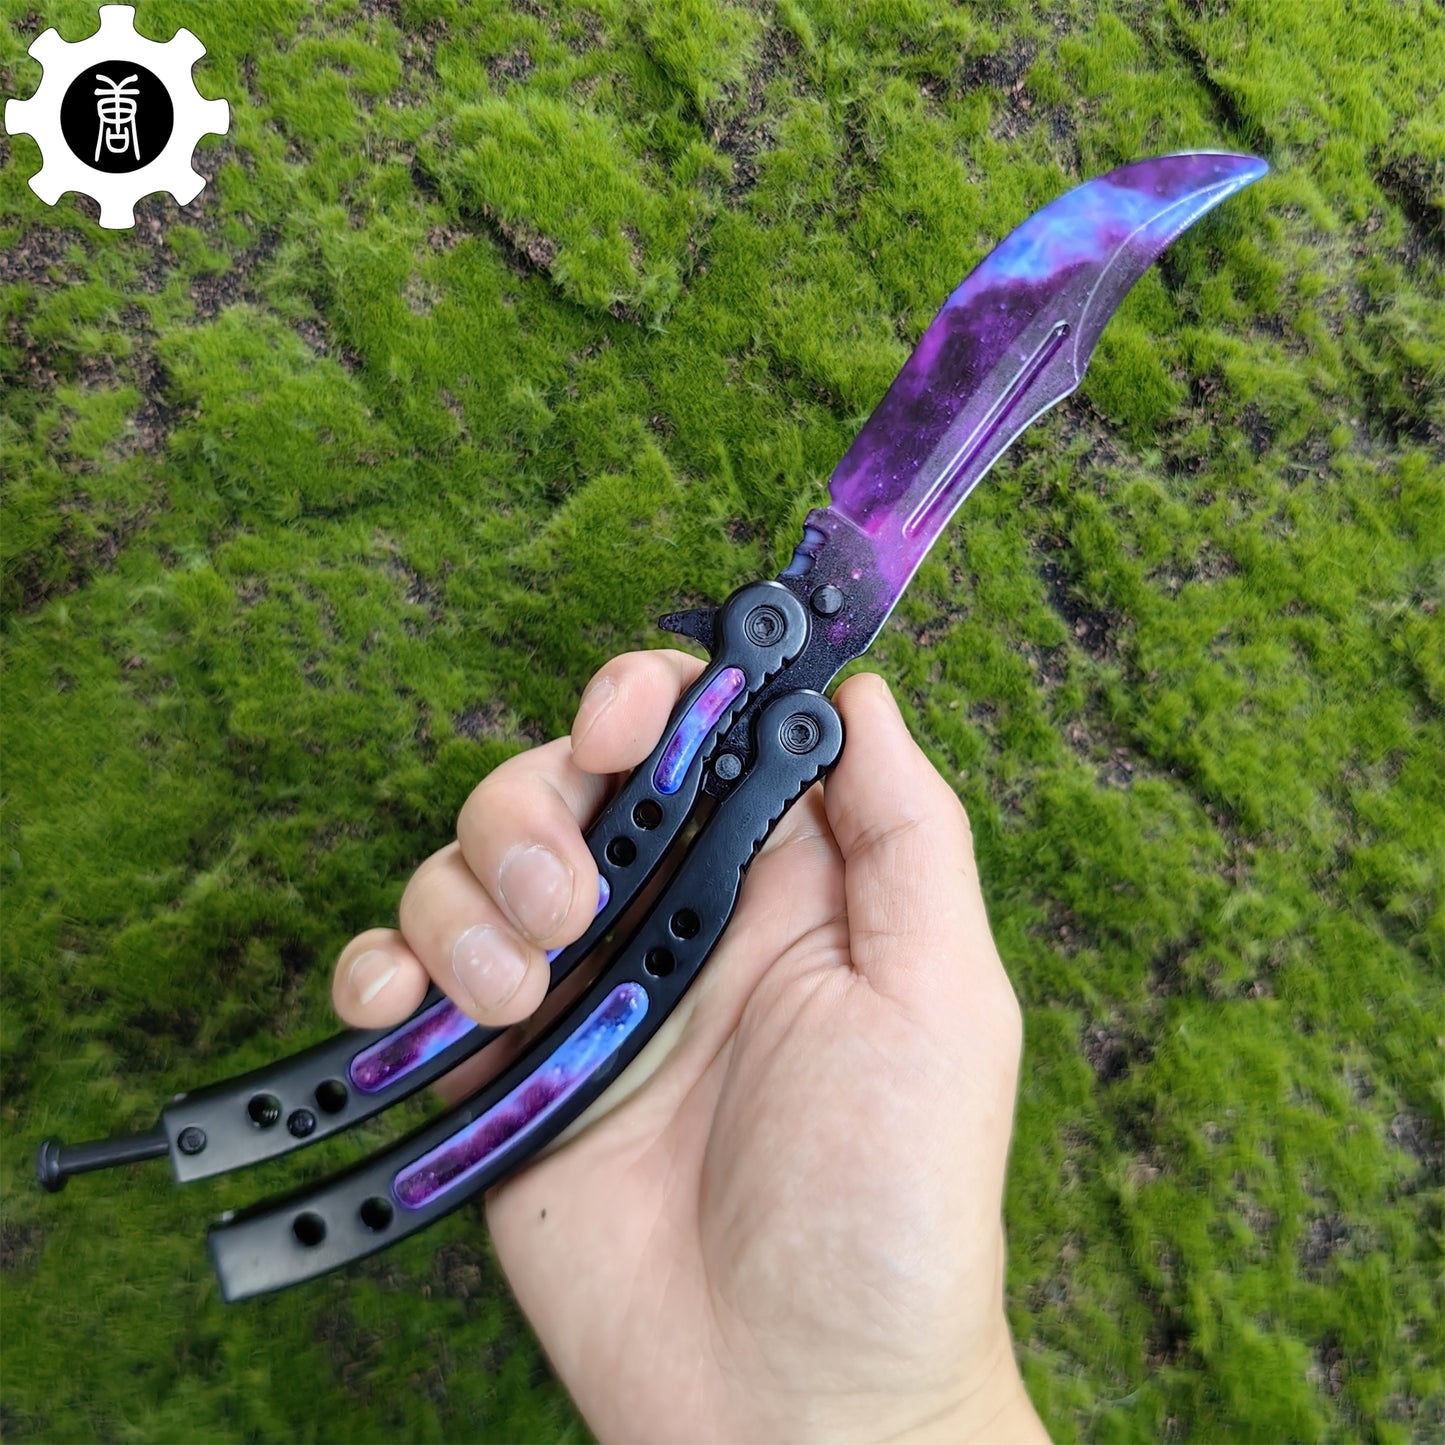 Galaxy Black Balisong Metal Butterfly Knife Game Prop 